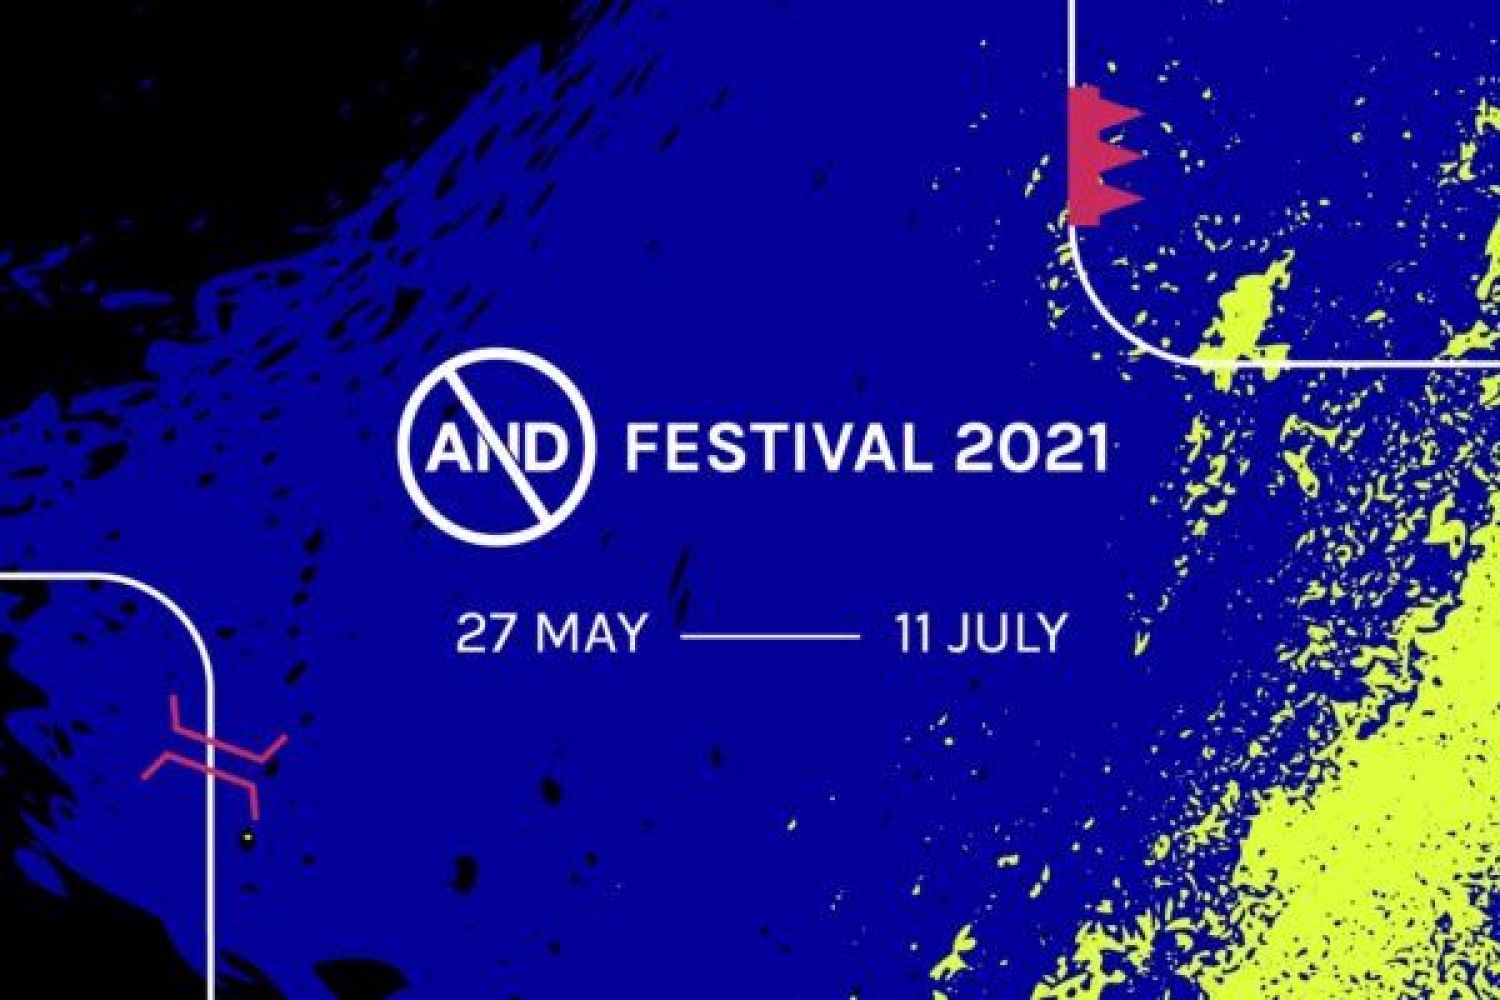 ‘Abandon Normal Devices’ aka AND Festival 